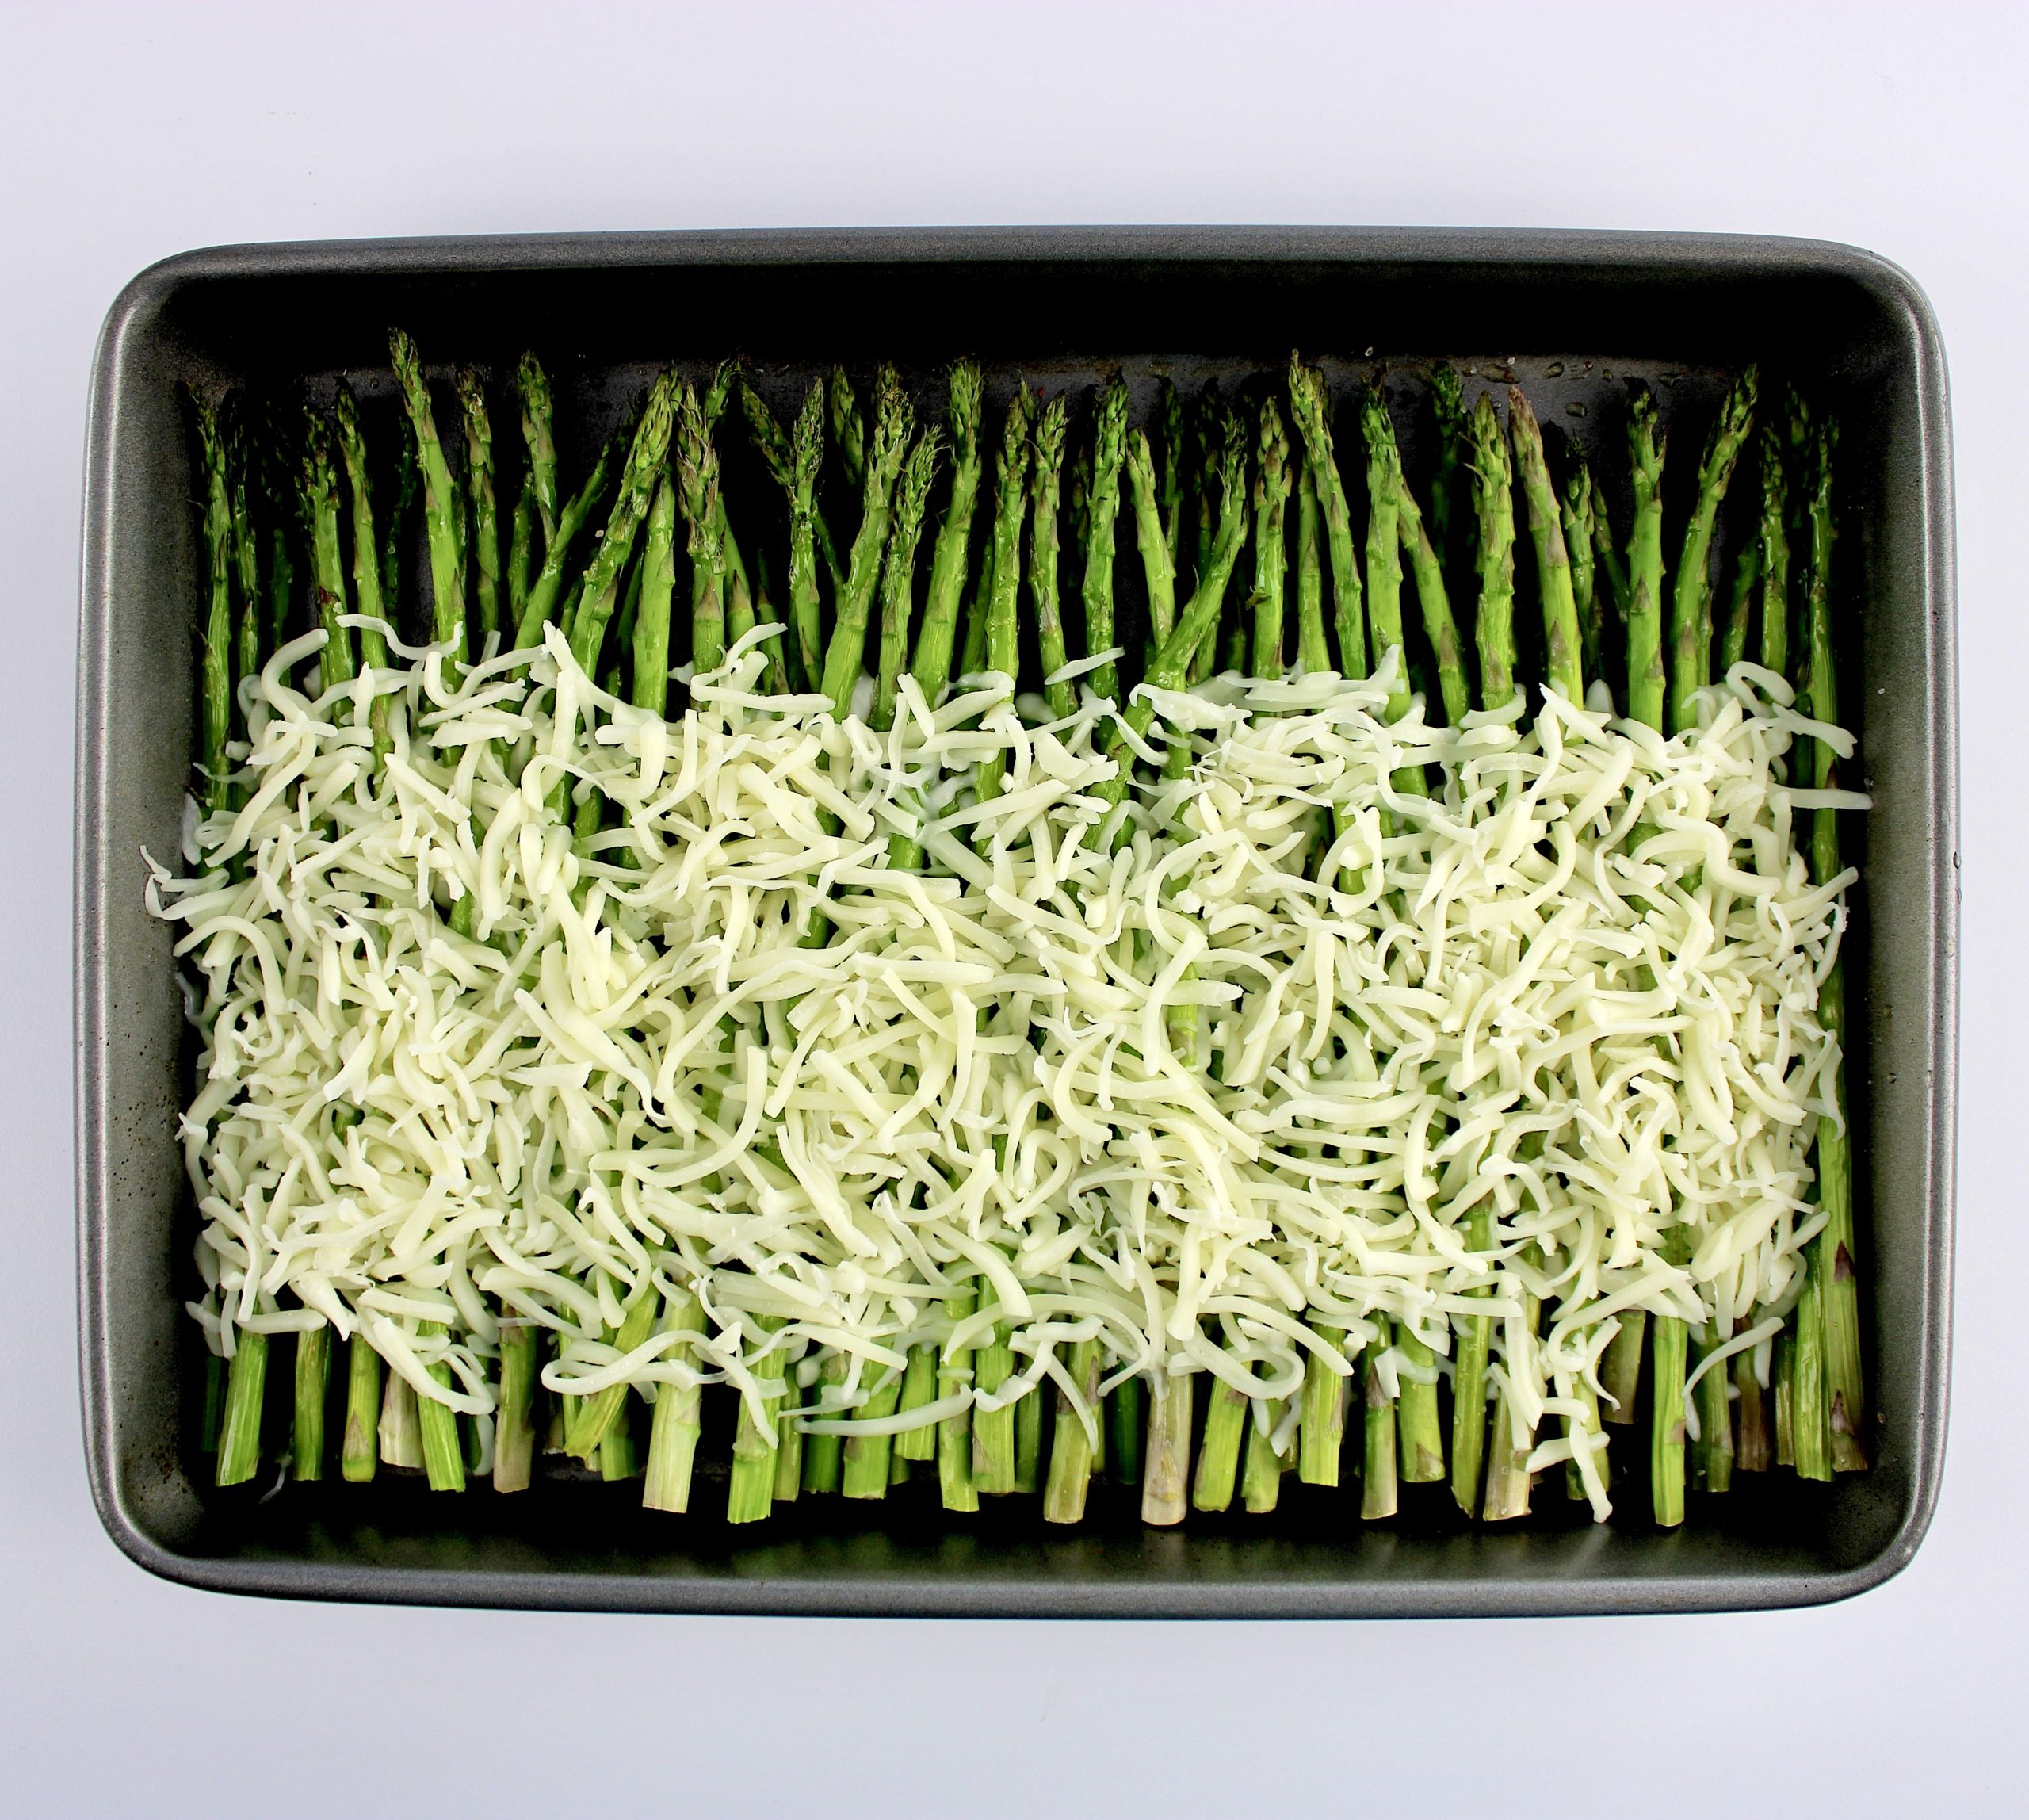 baked asparagus on baking sheet with shredded mozzarella cheese unbaked